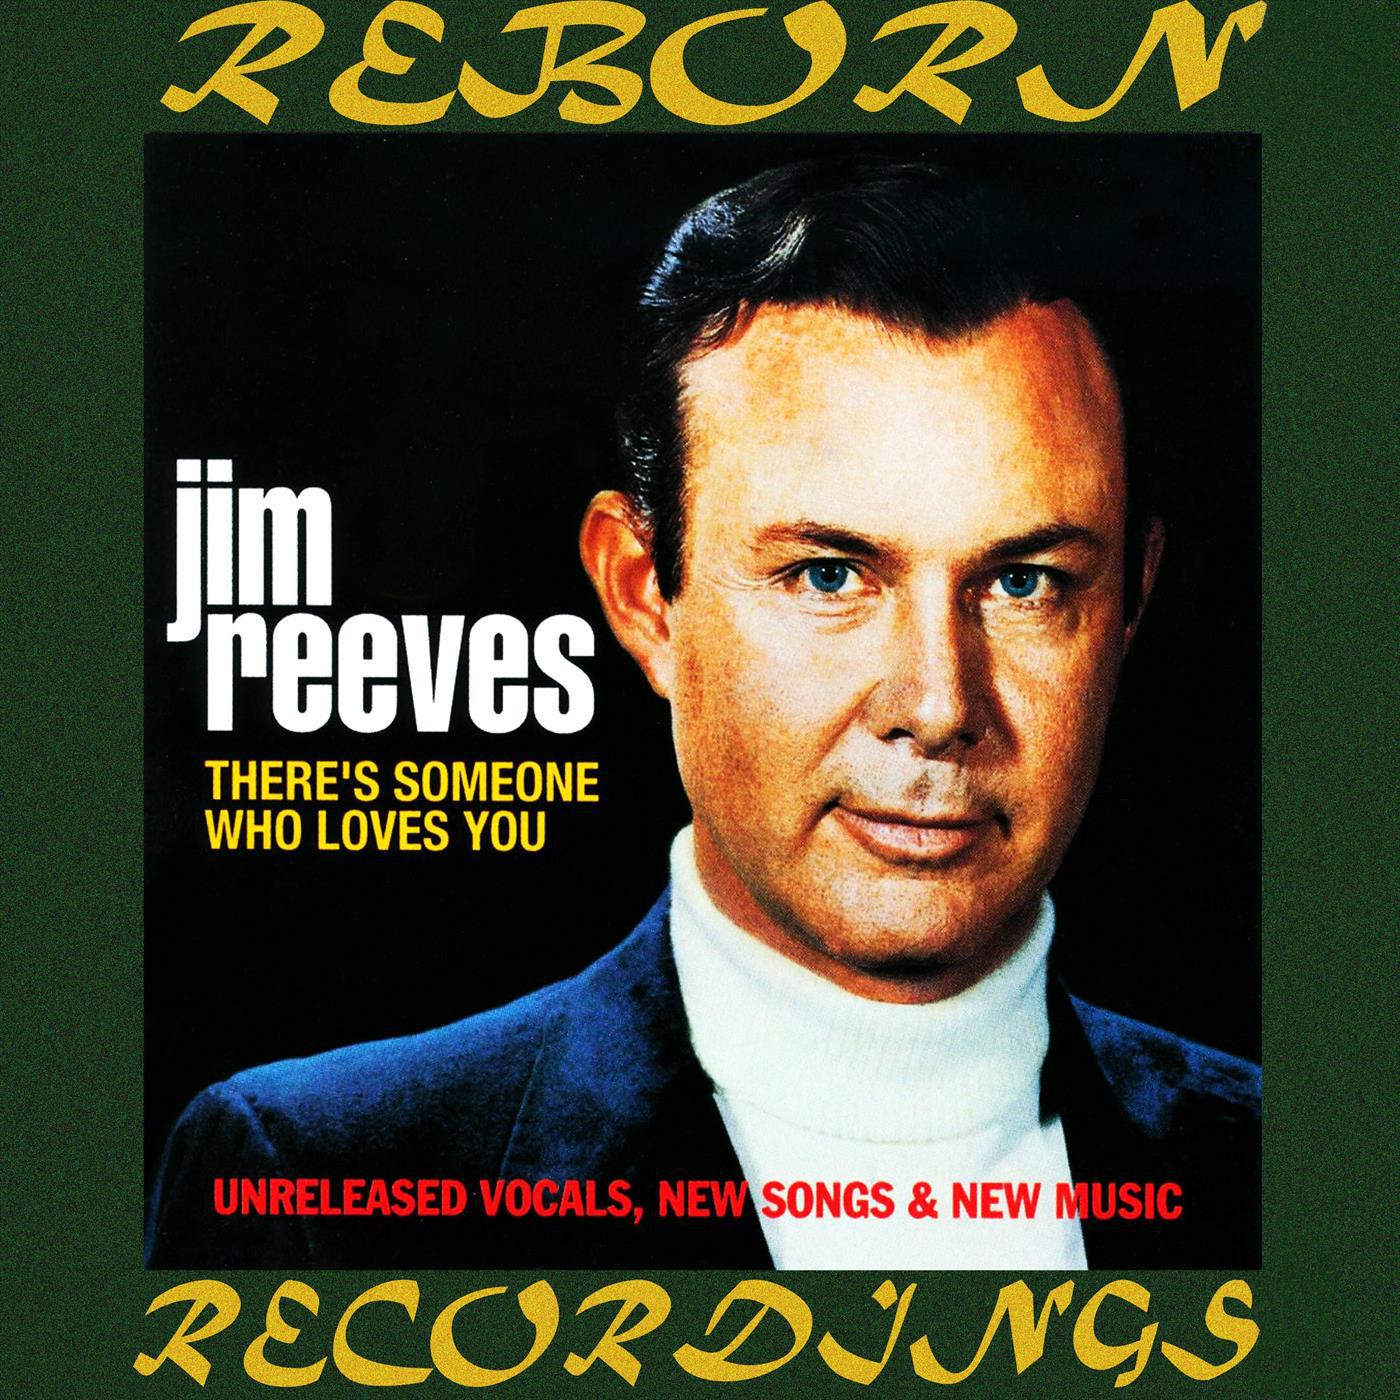 Interview With Jim Reeves